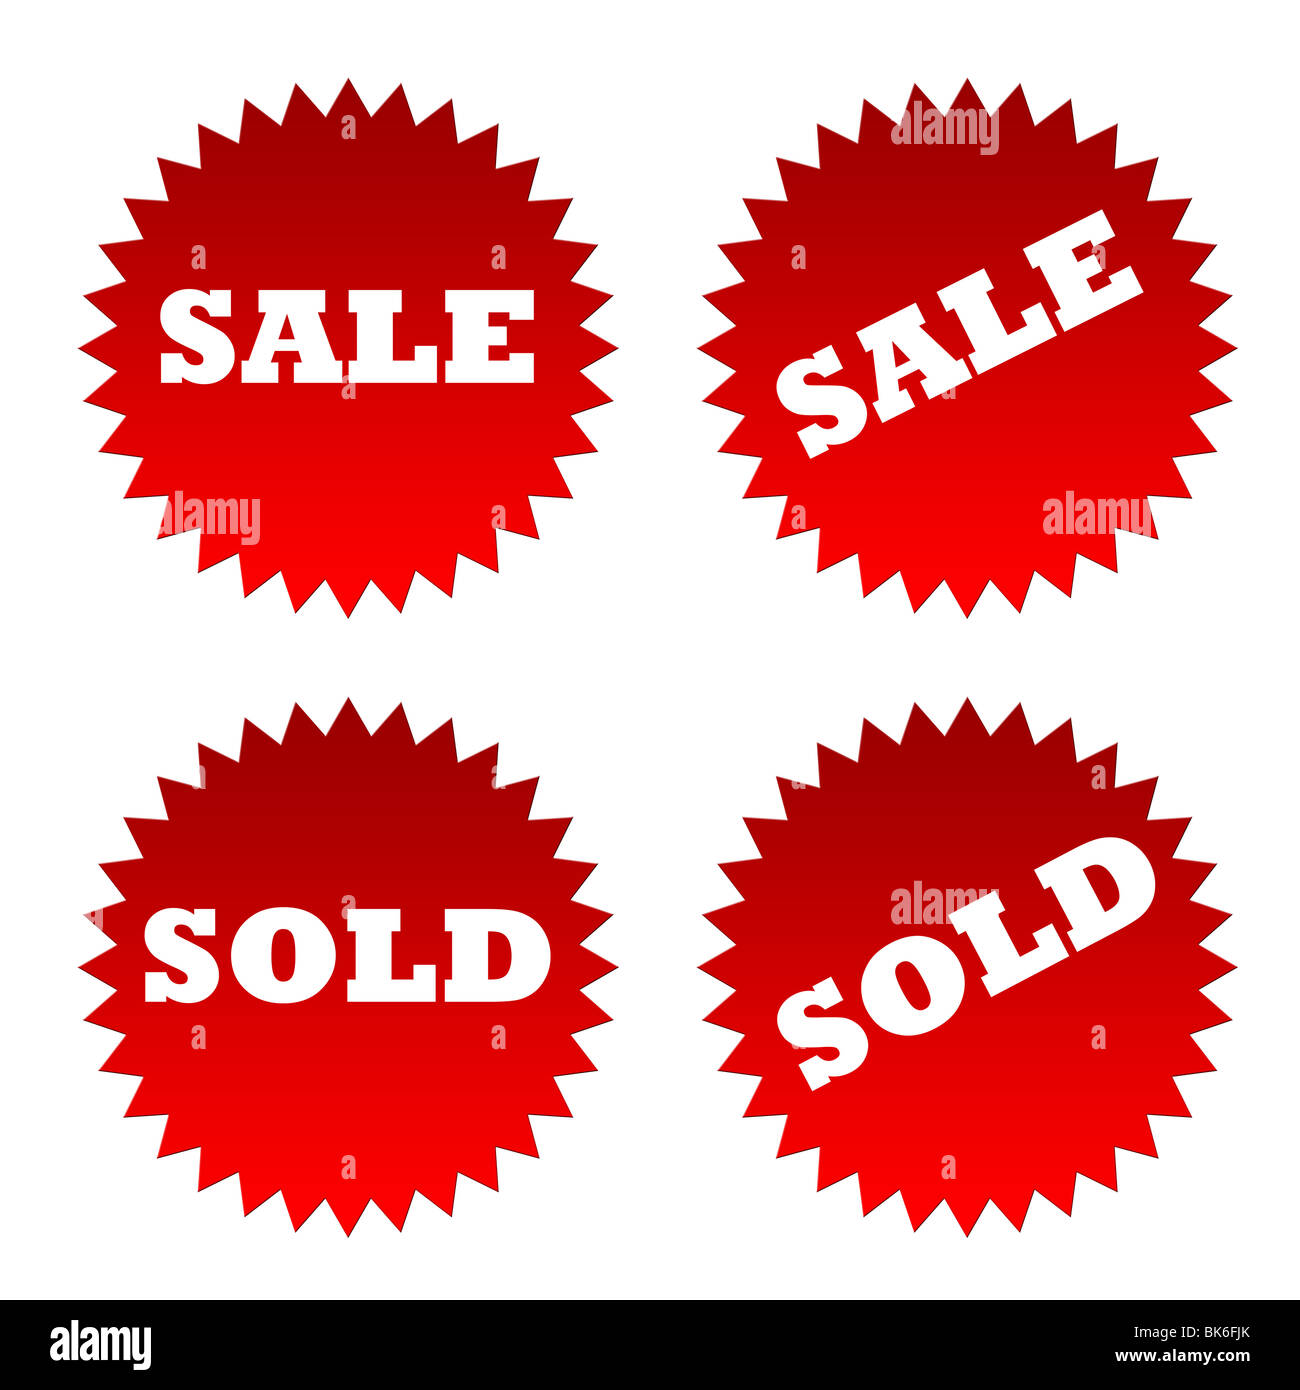 Red sale and sold stickers or labels isolated on white background. Stock Photo